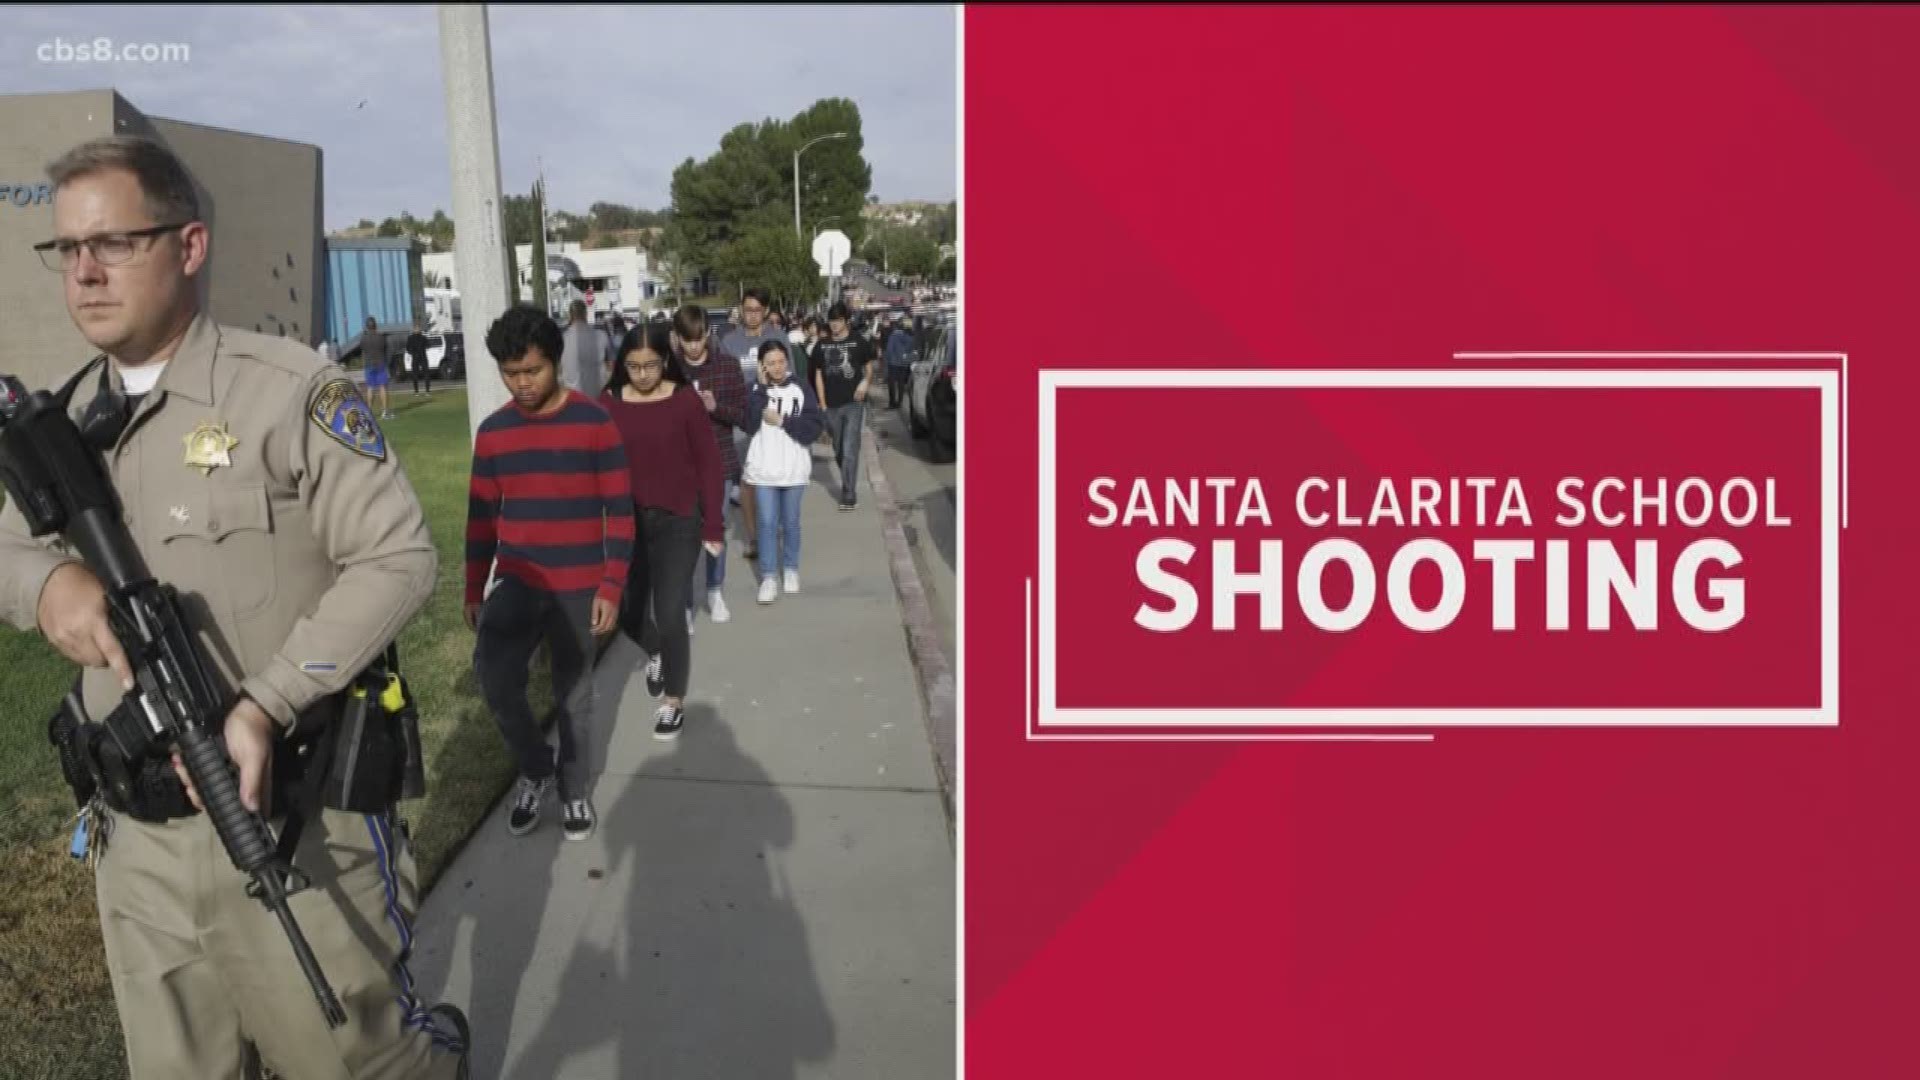 On his 16th birthday, a Saugus High School student walked into the campus quad, pulled a semiautomatic handgun from his backpack and shot five classmates.